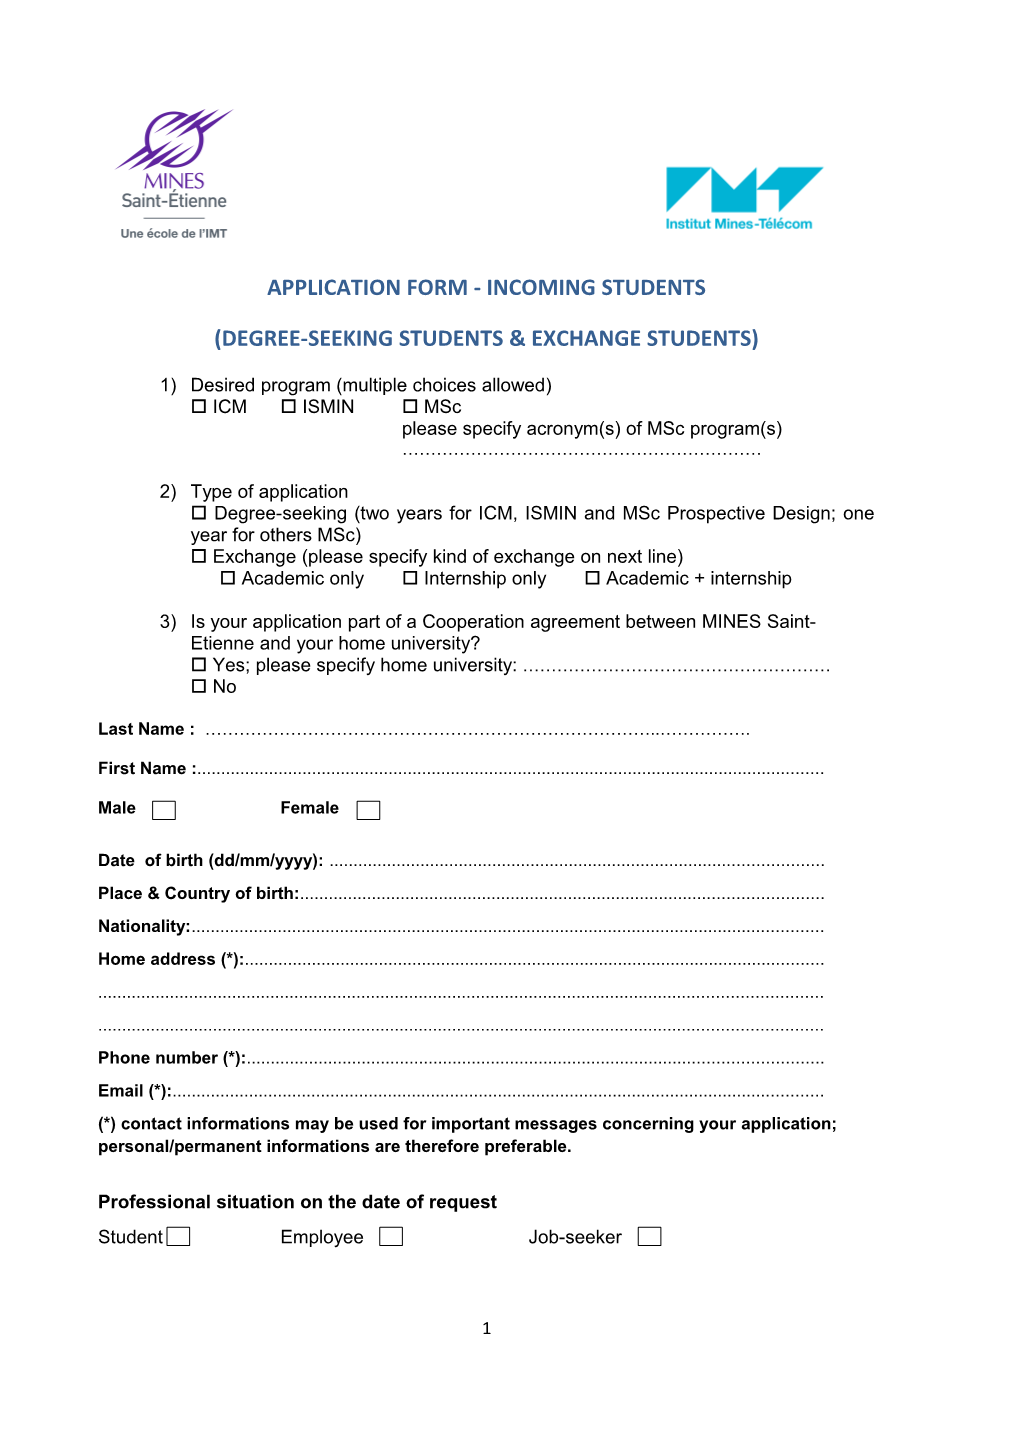 Application Form- Incoming Students